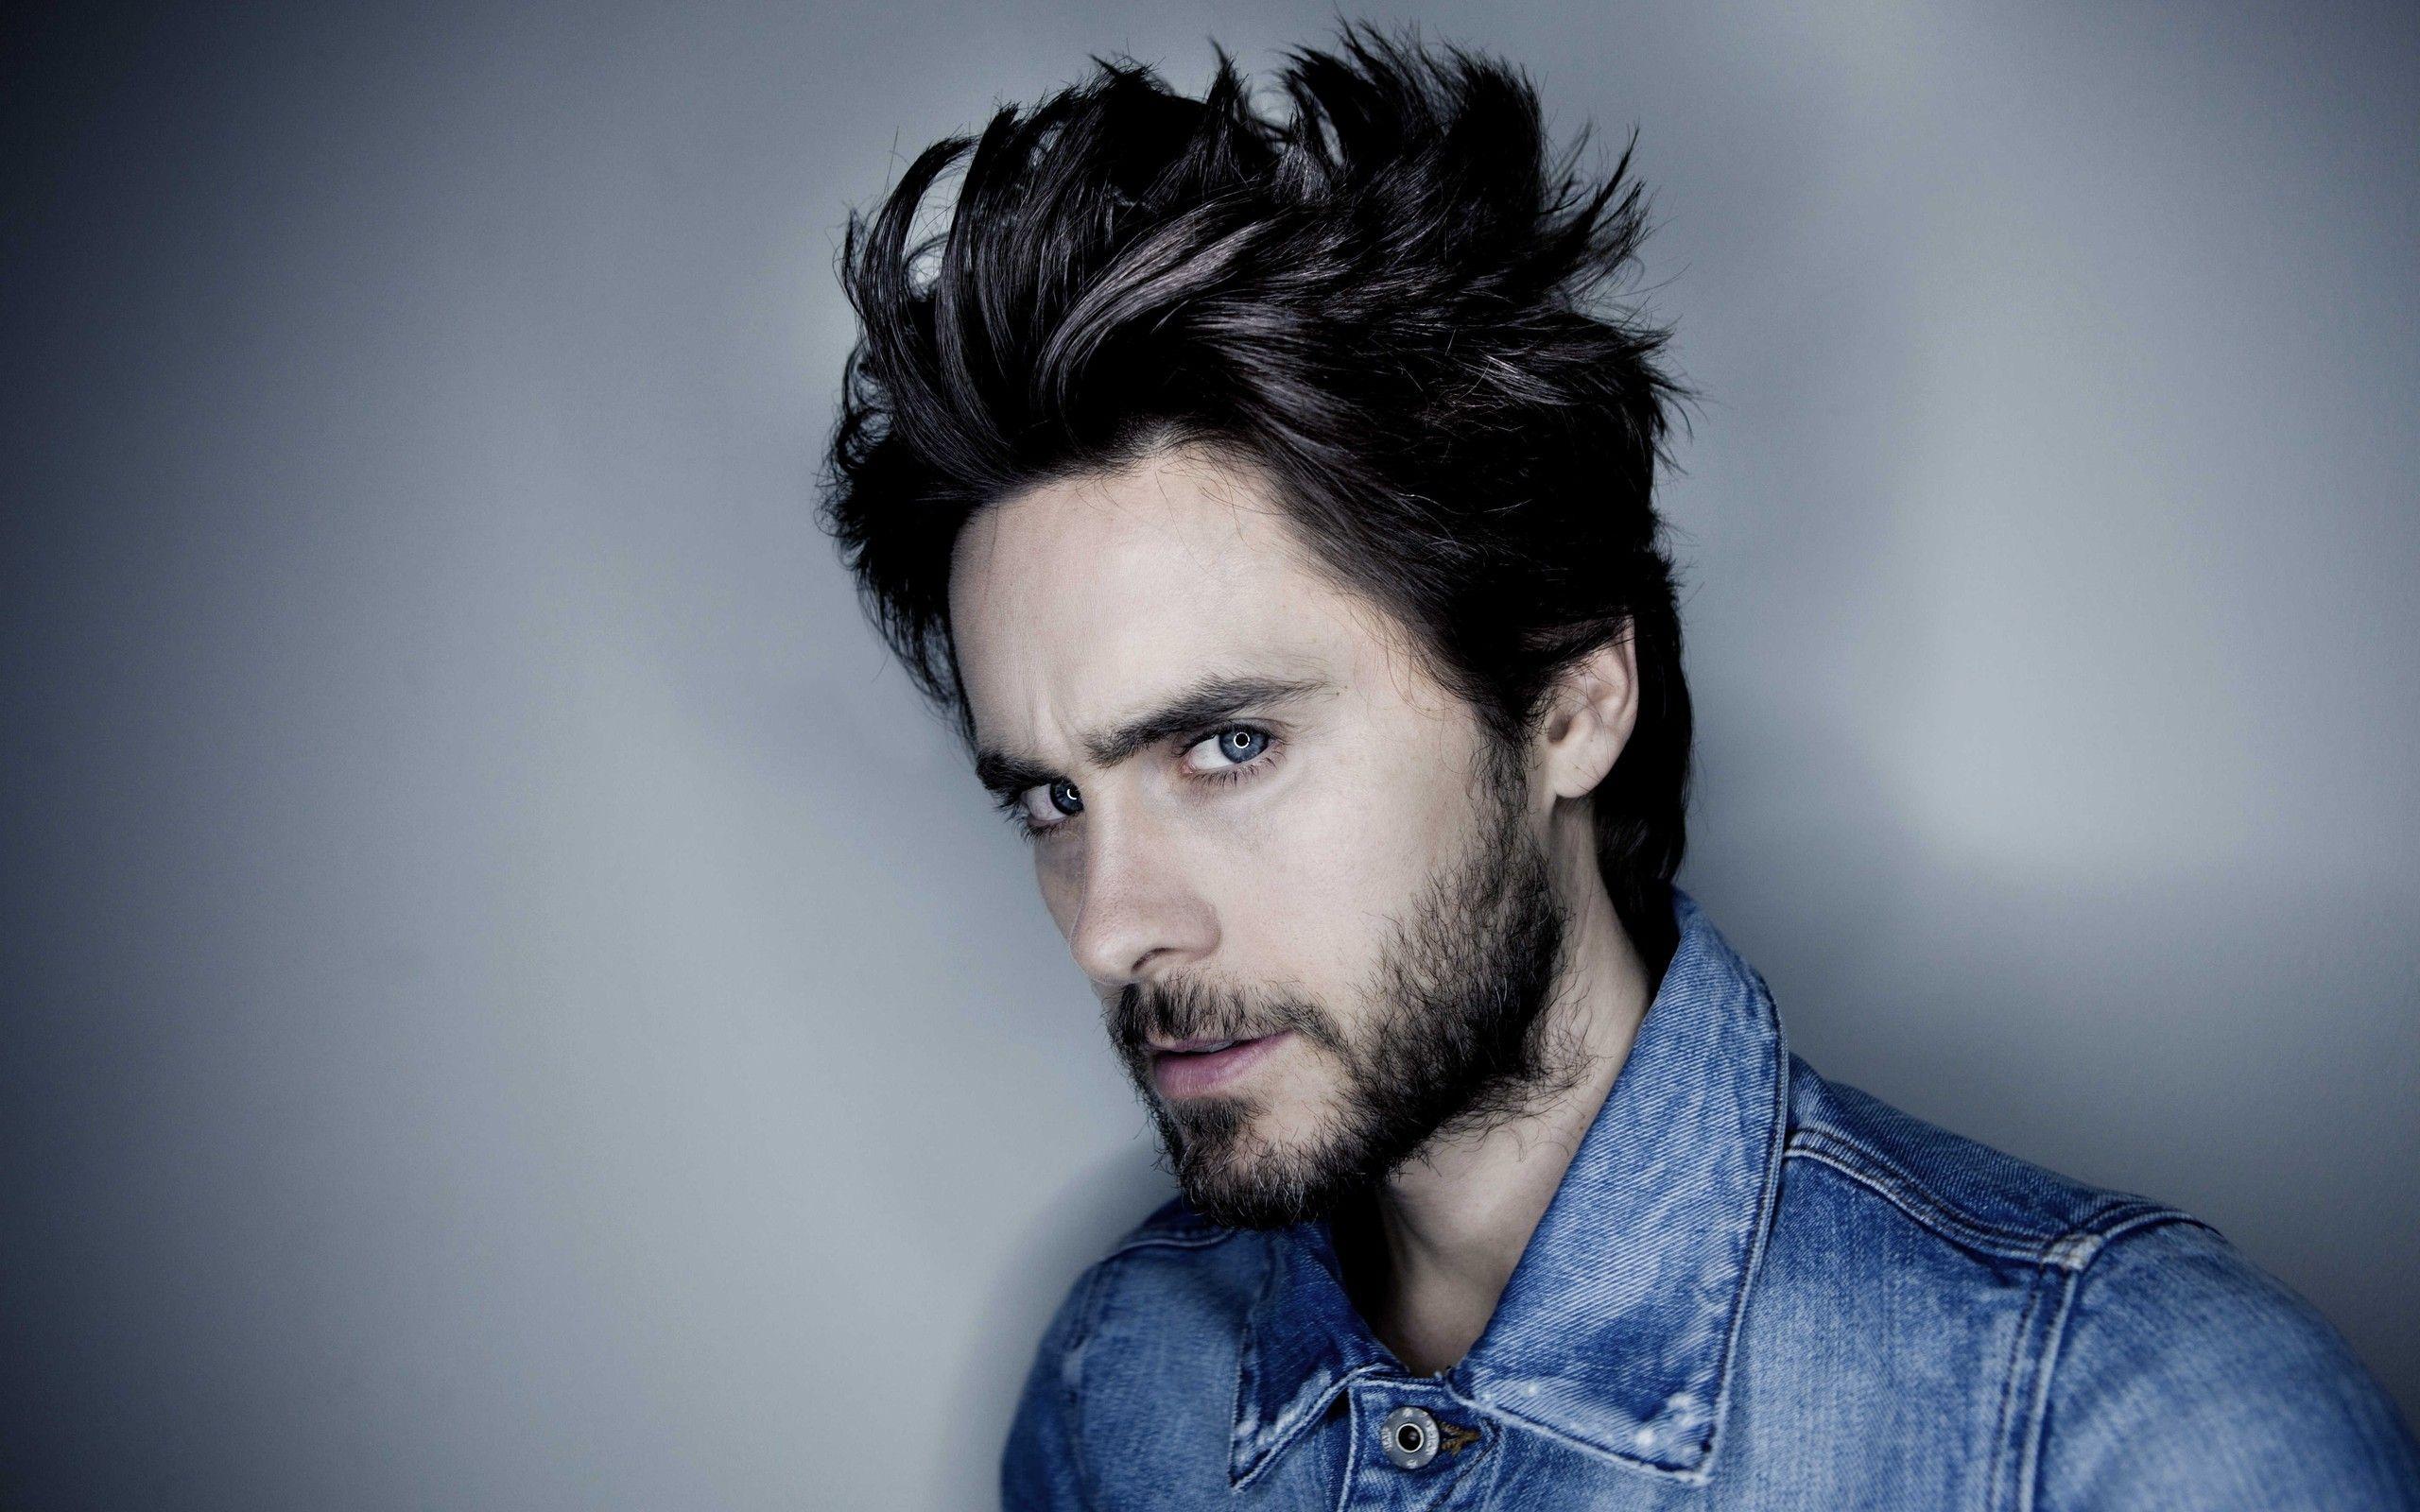 music, 30 Seconds to Mars, Jared Leto, portraits wallpaper